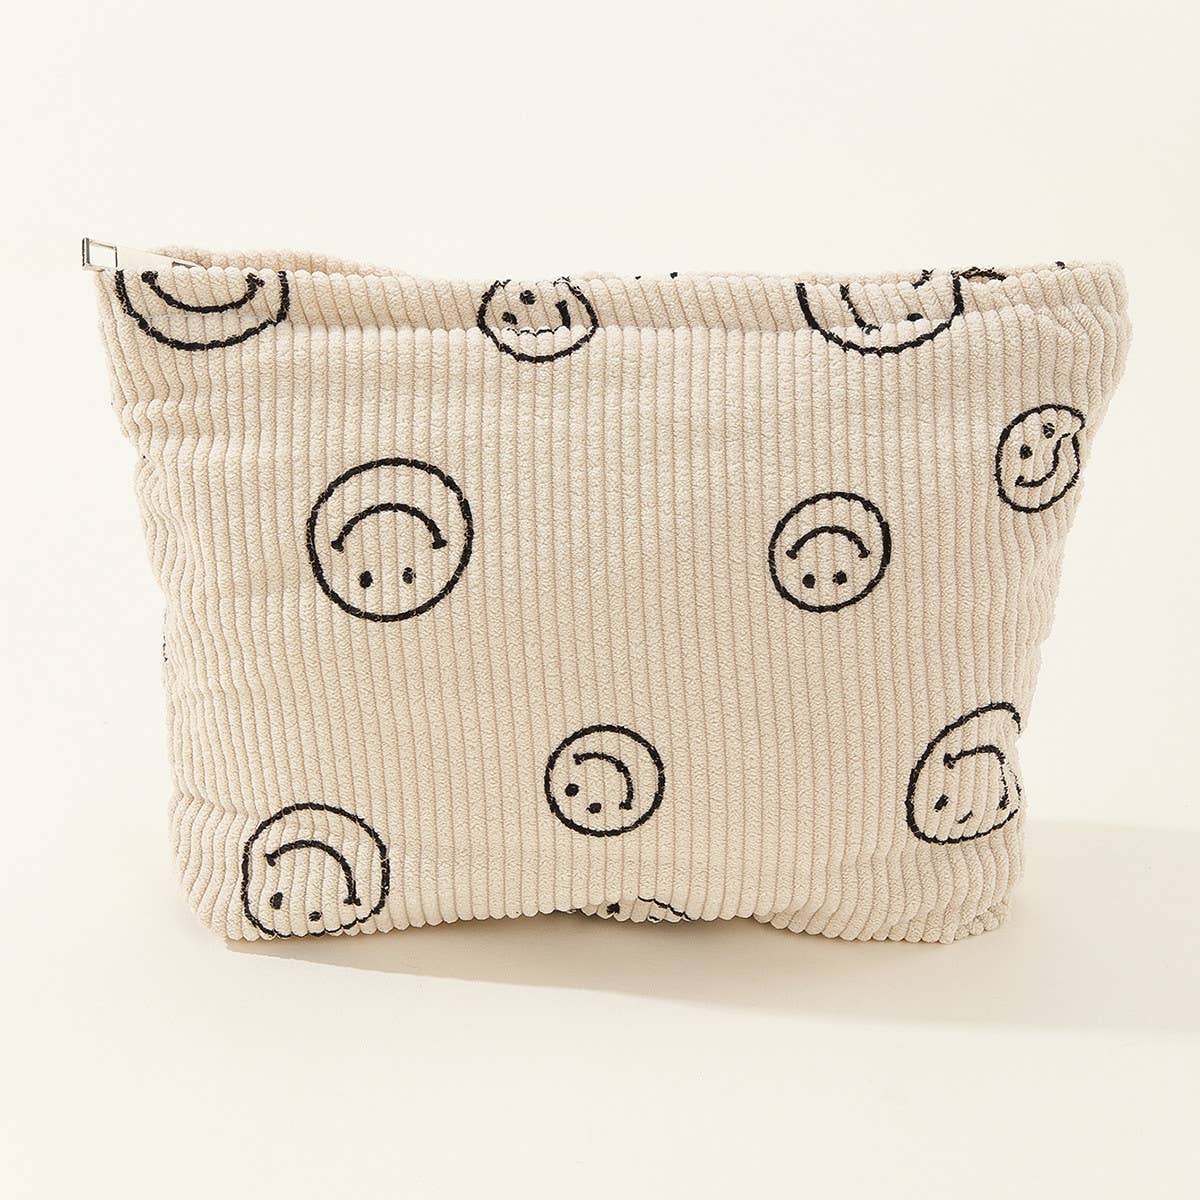 Smiley Face Cosmetic Pouch